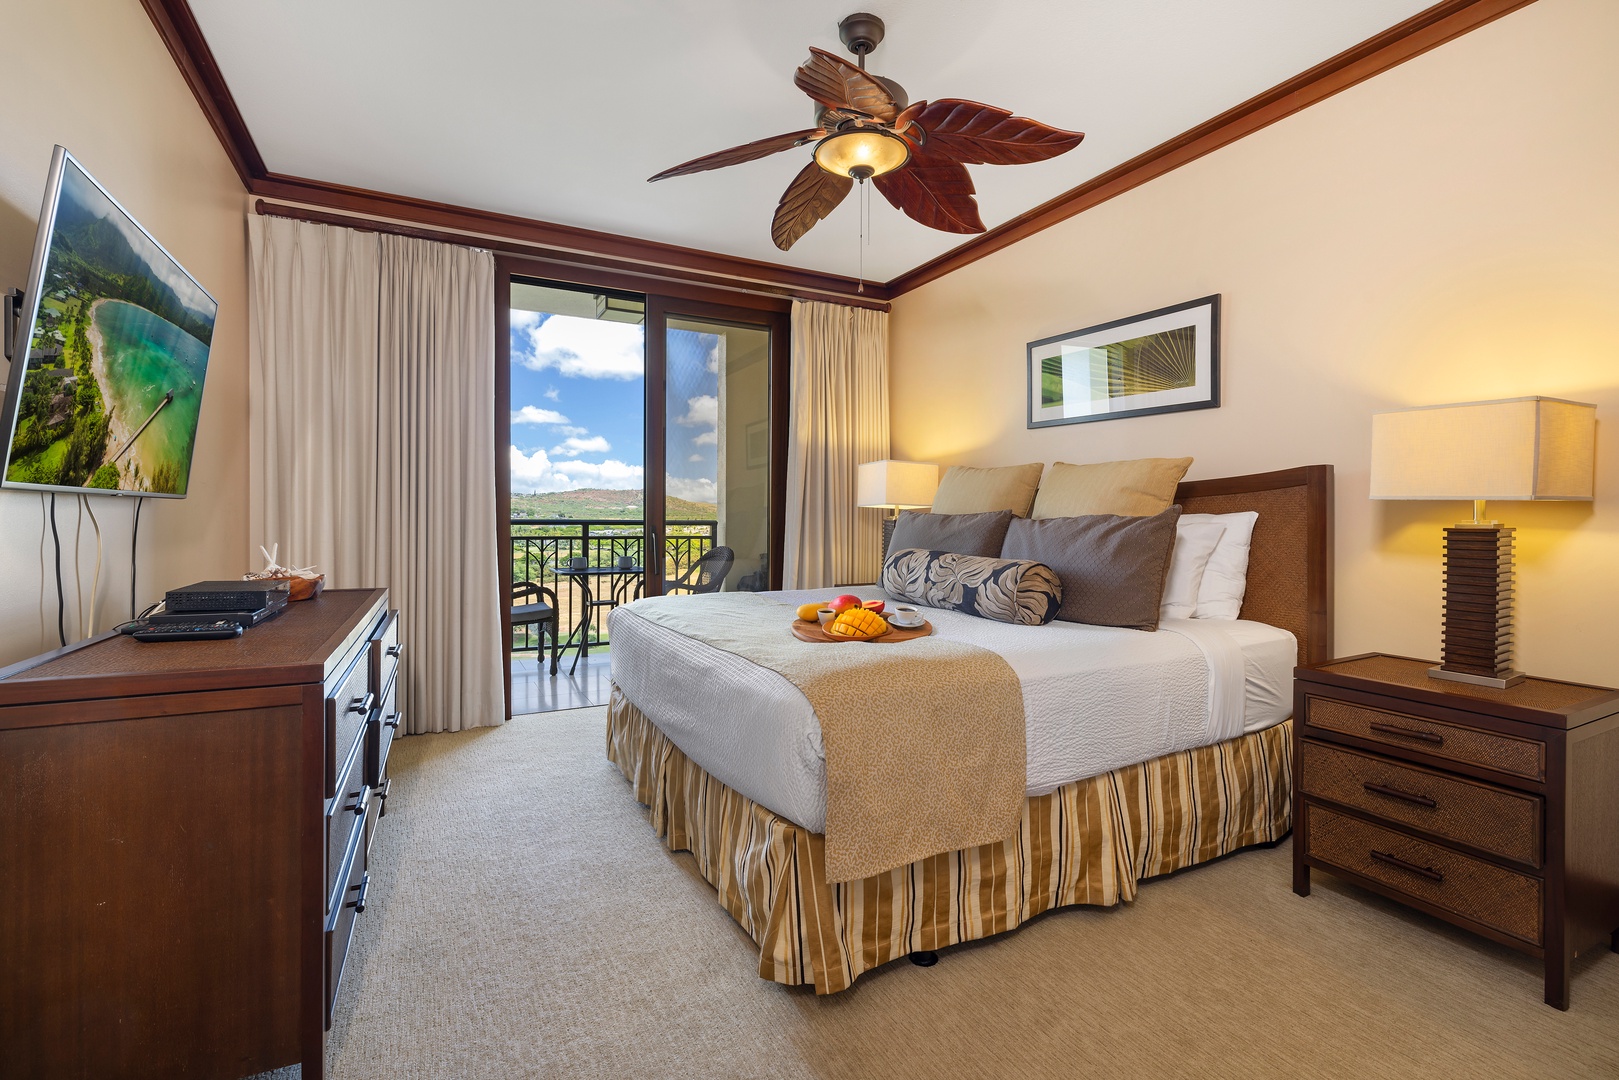 Kapolei Vacation Rentals, Ko Olina Beach Villas O1105 - The primary suite features king bed and private lanai.